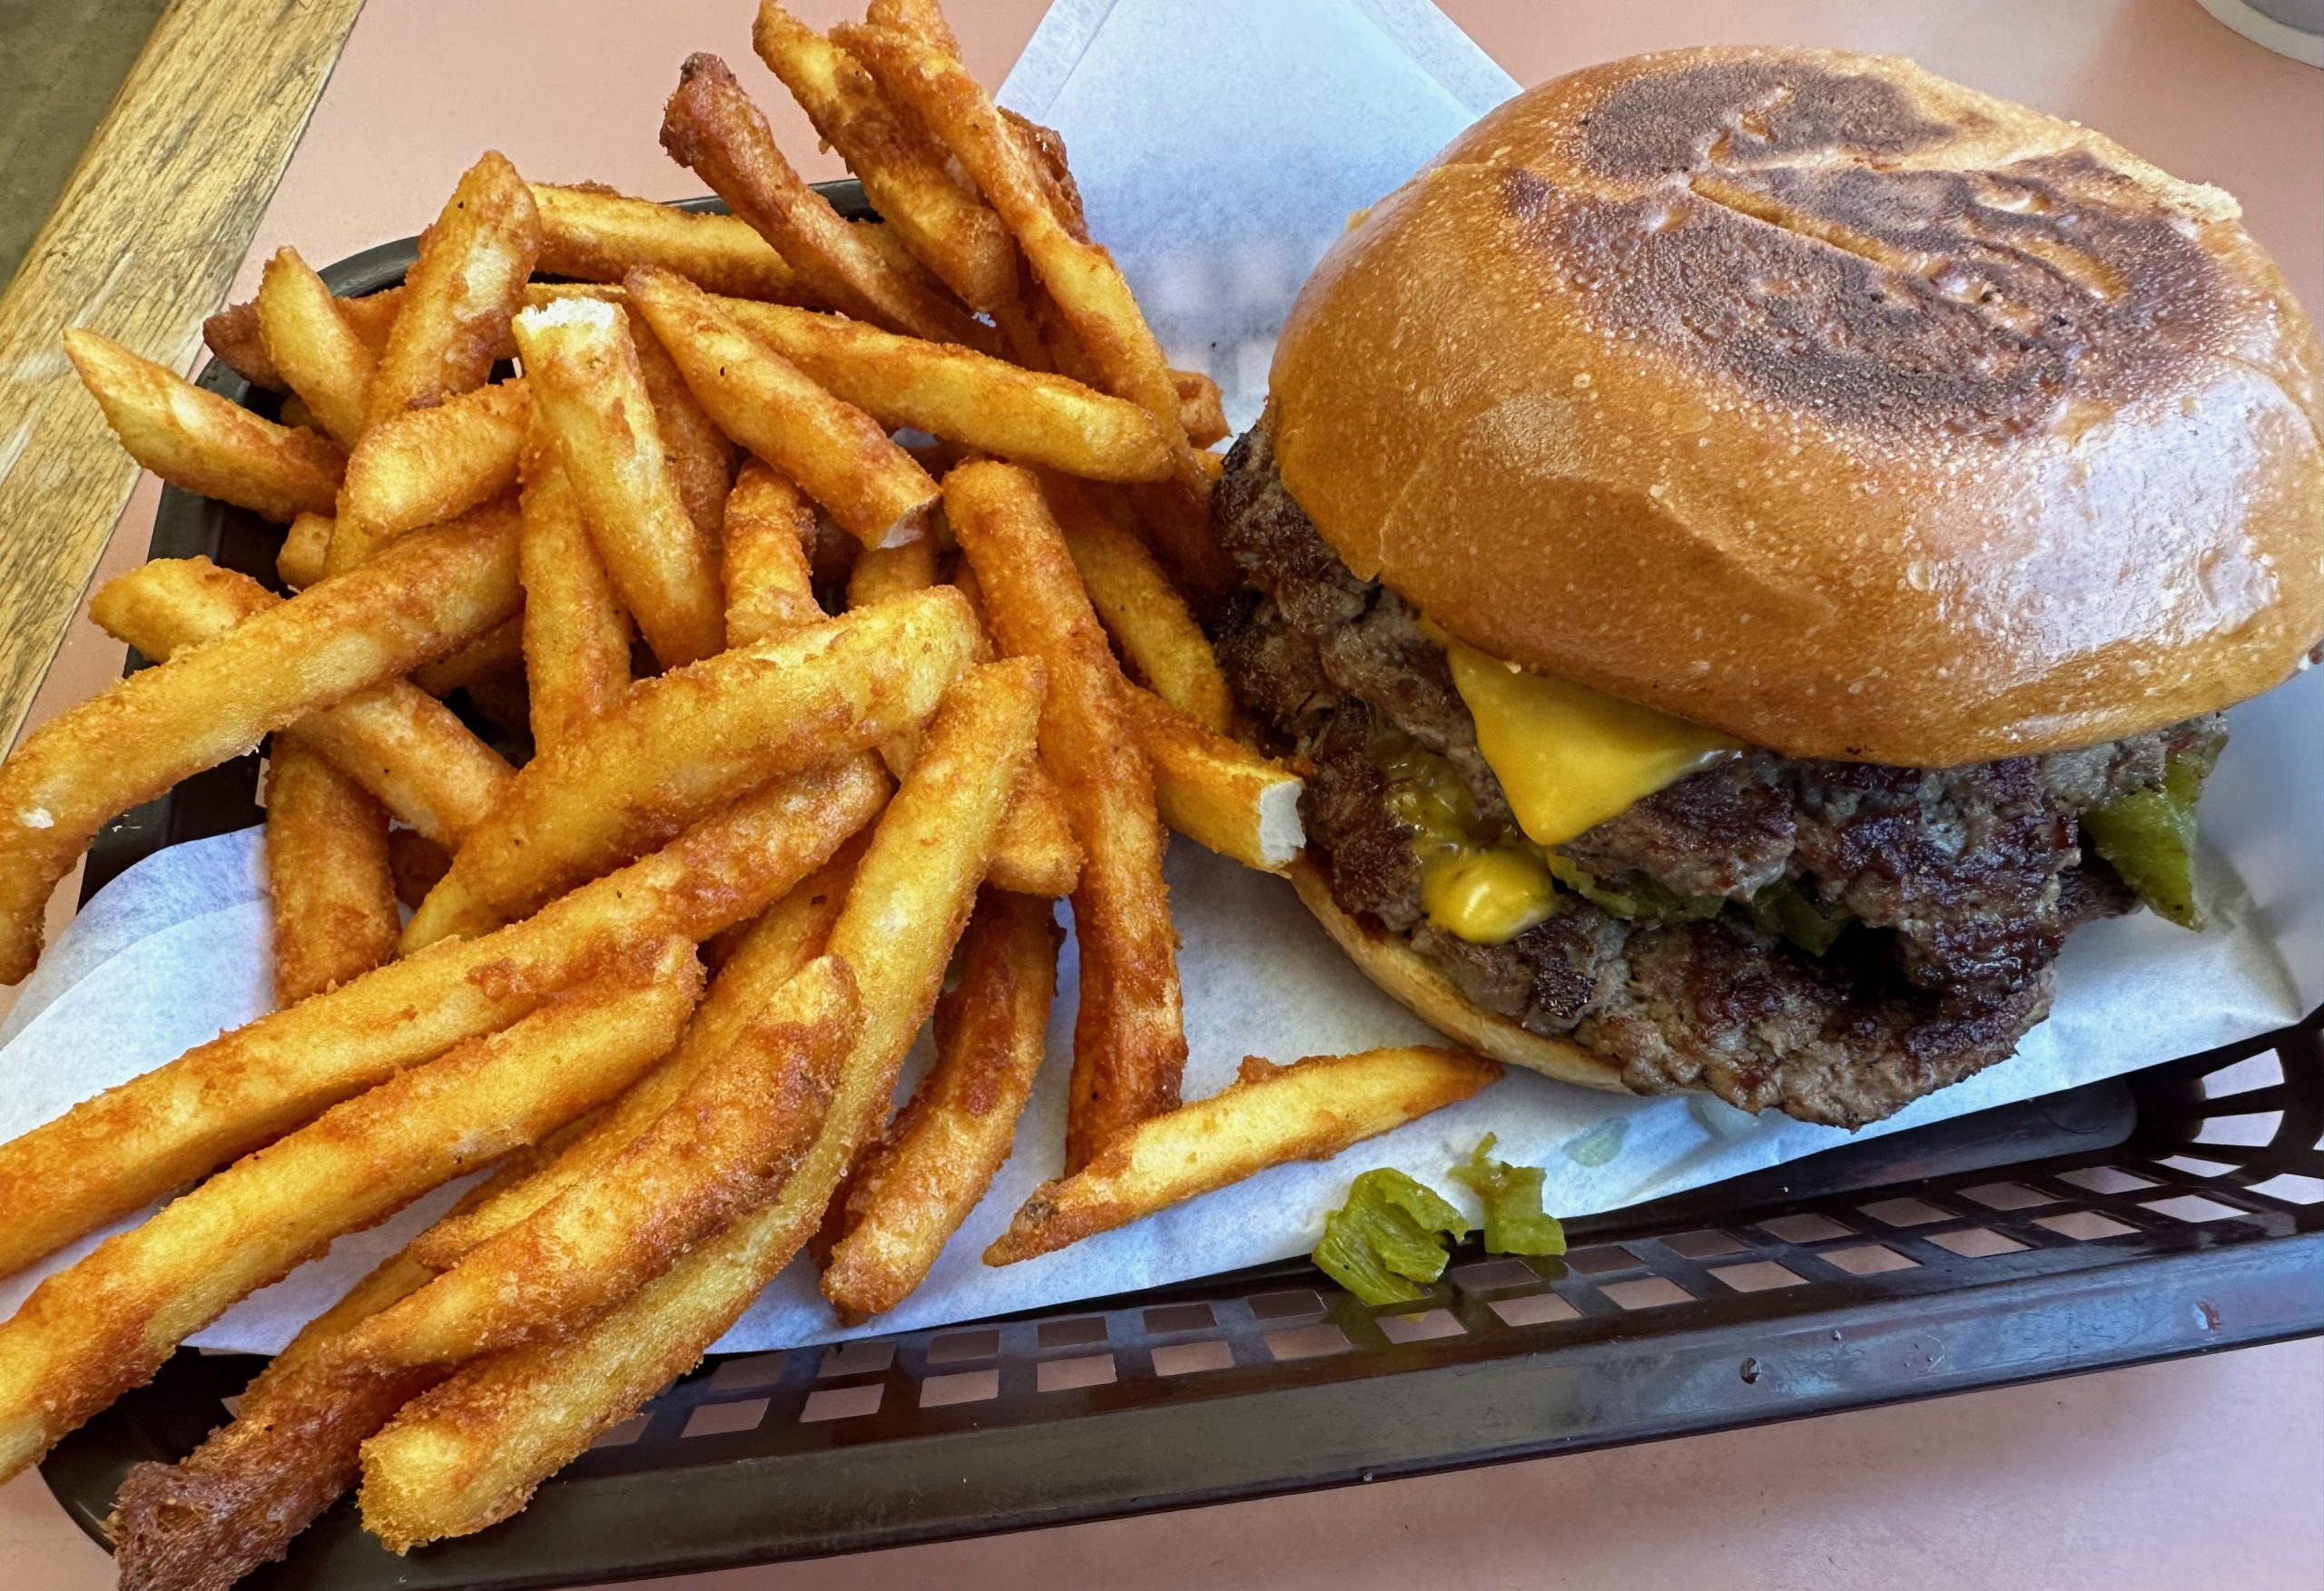 Big Mike’s Burgers & More – Belen, New Mexico